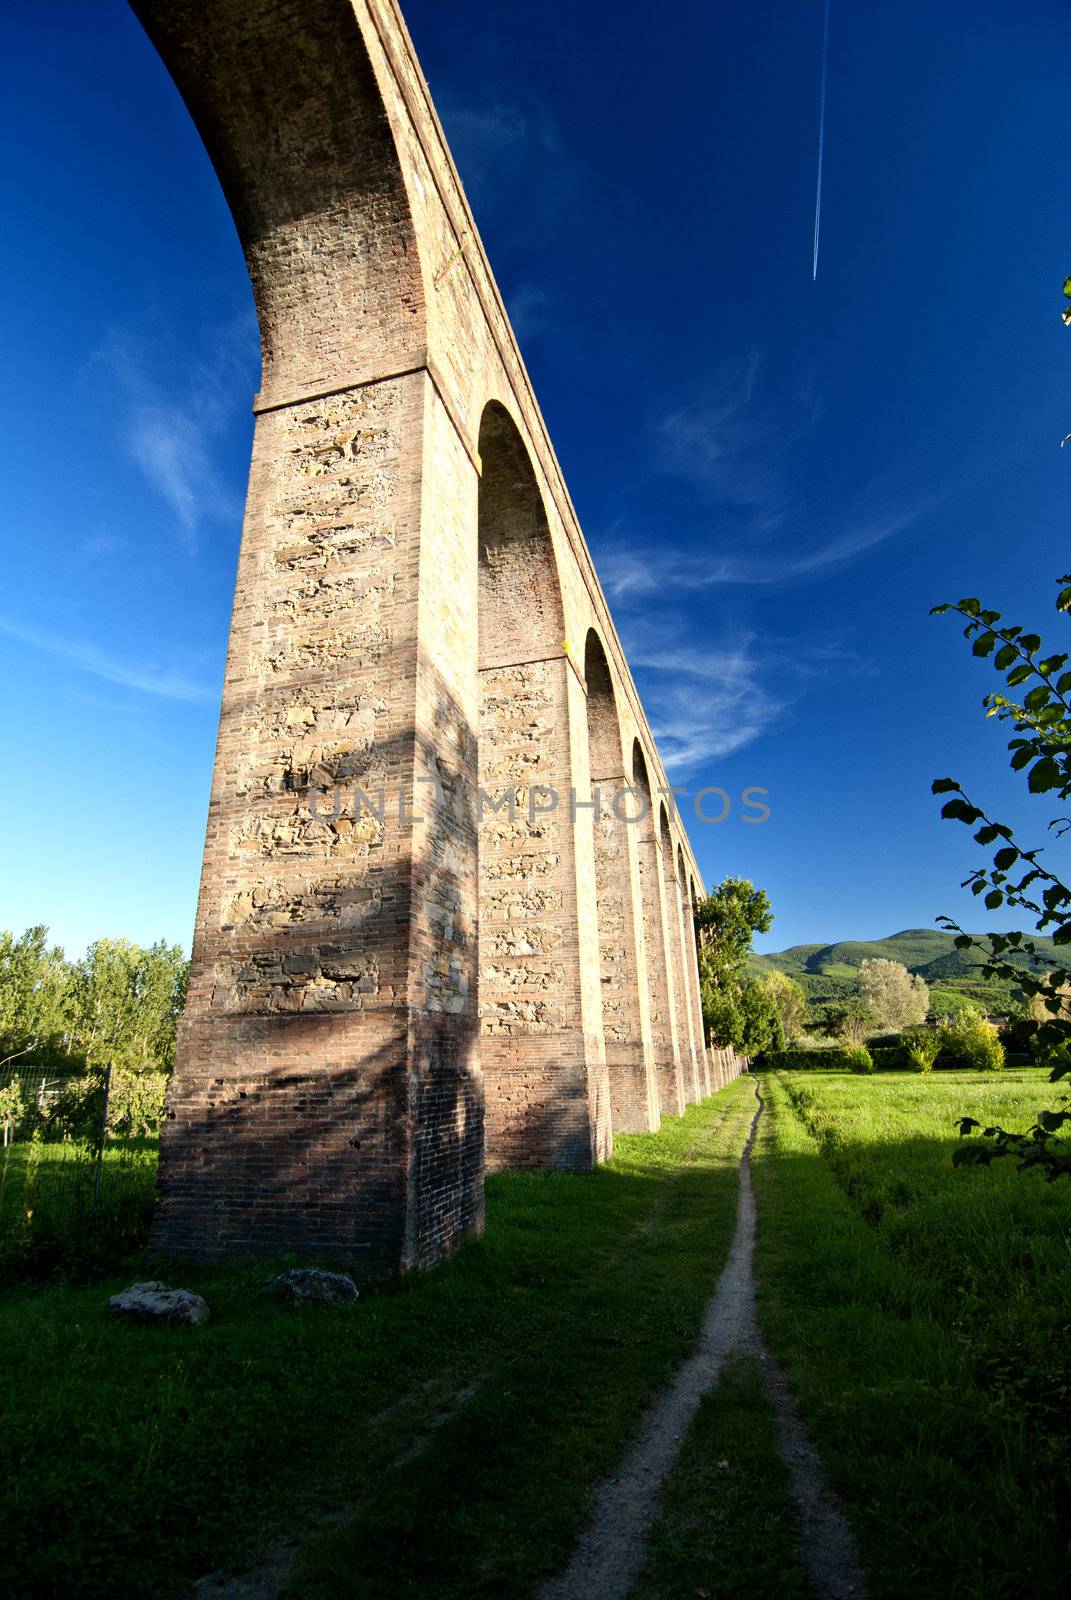 Detail of the Ancient Roman Aqueduct in Lucca, Italy